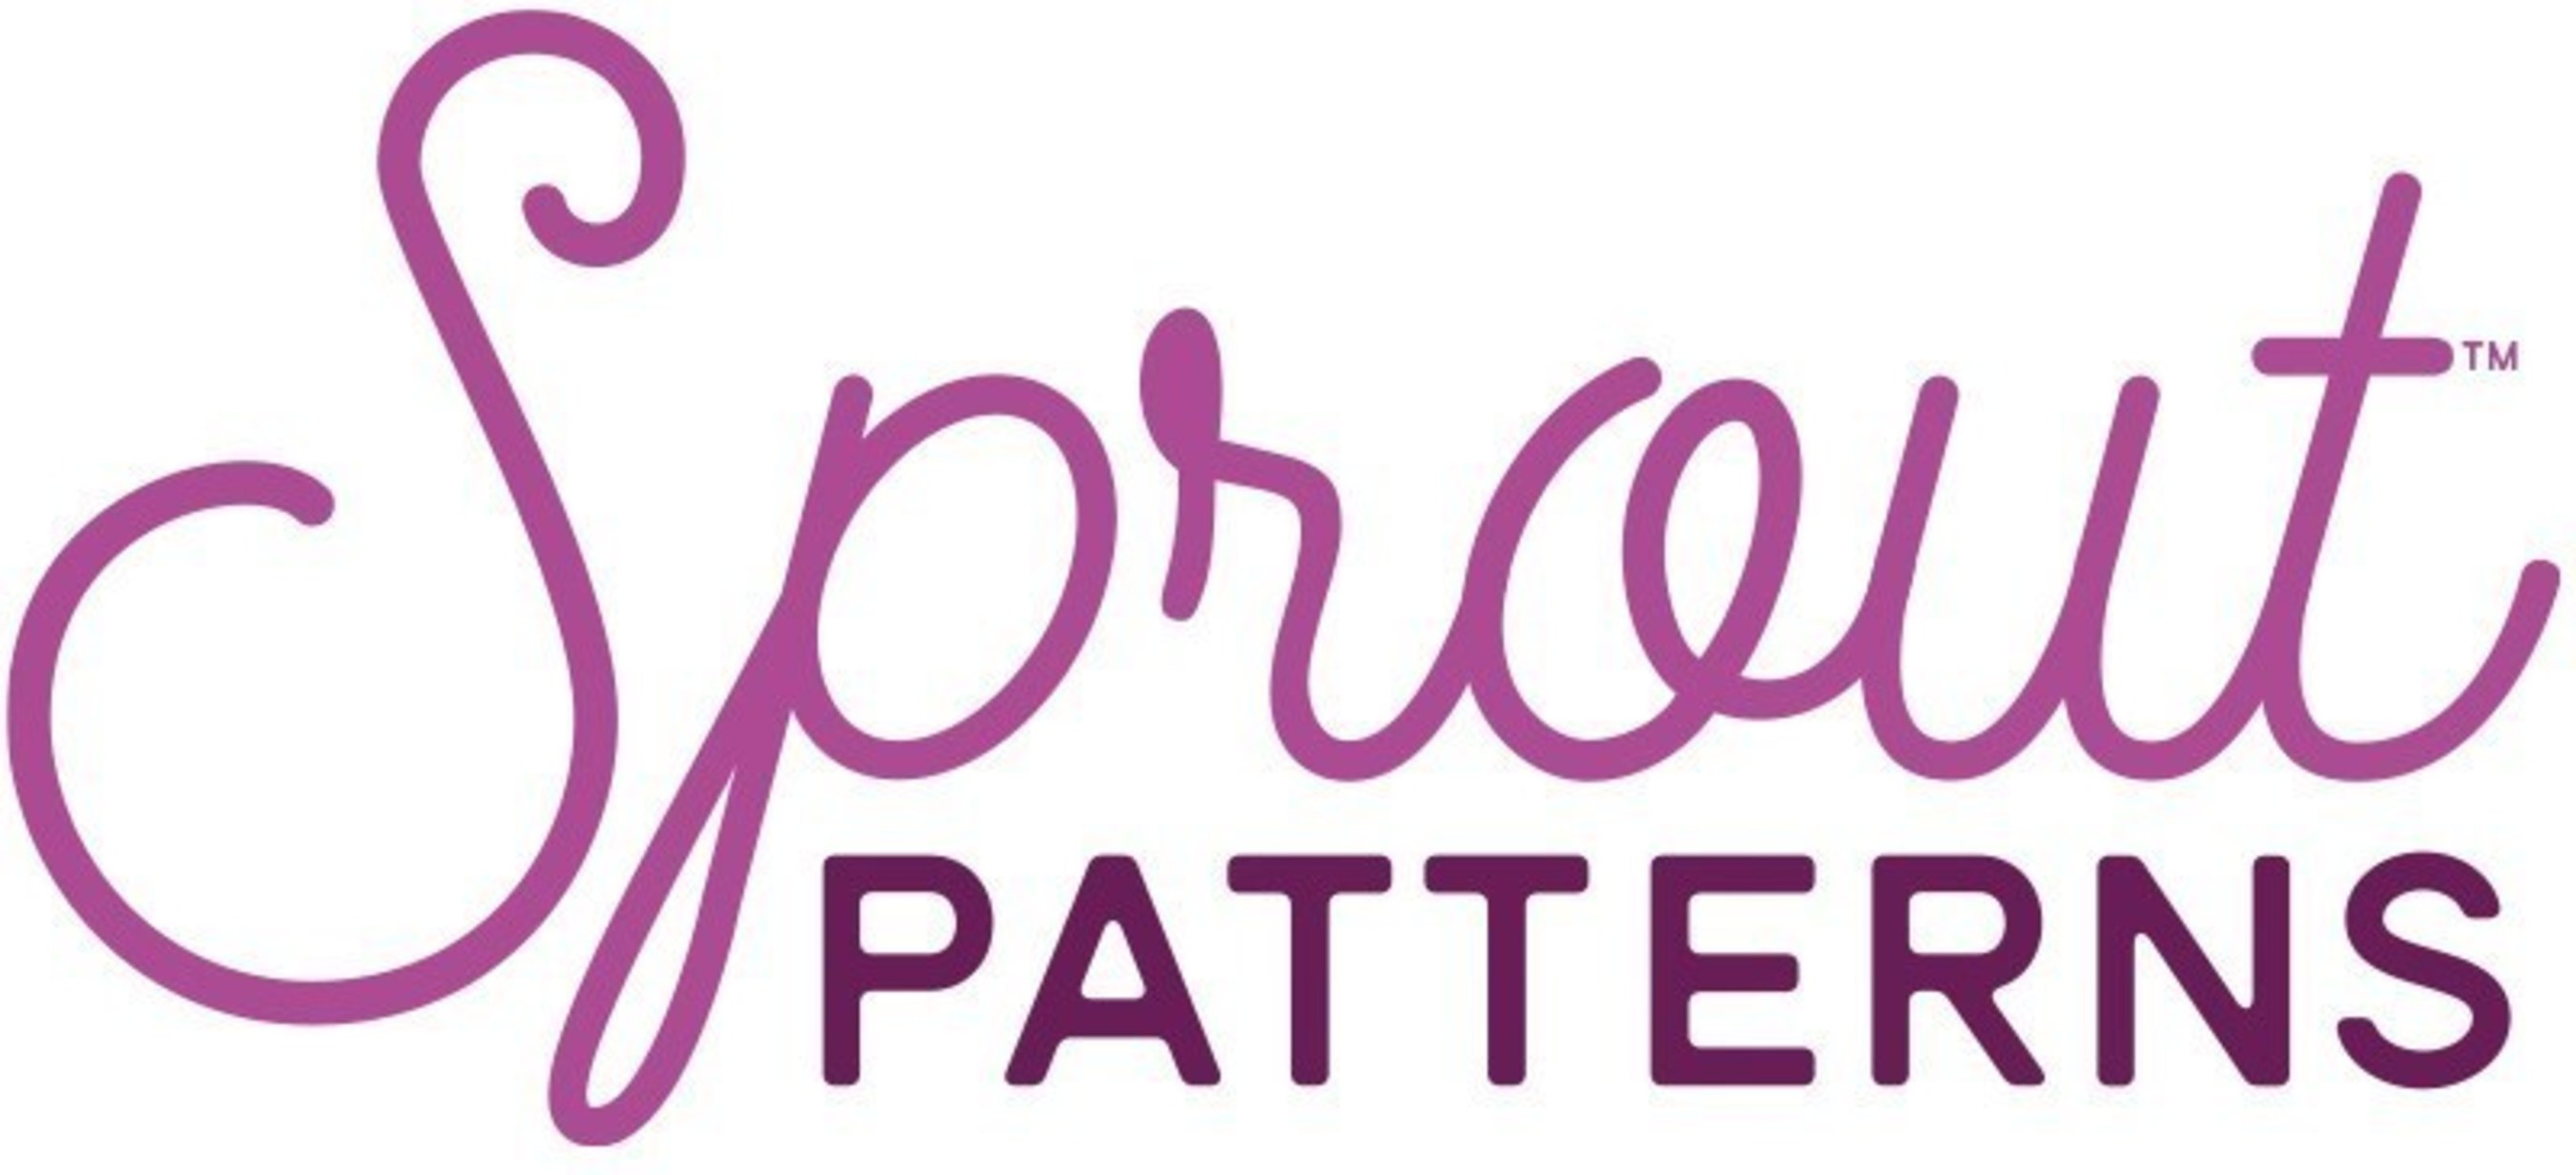 Sprout Patterns is a service that combines independent clothing patterns with Spoonflower designs to create modern cut and sew projects.